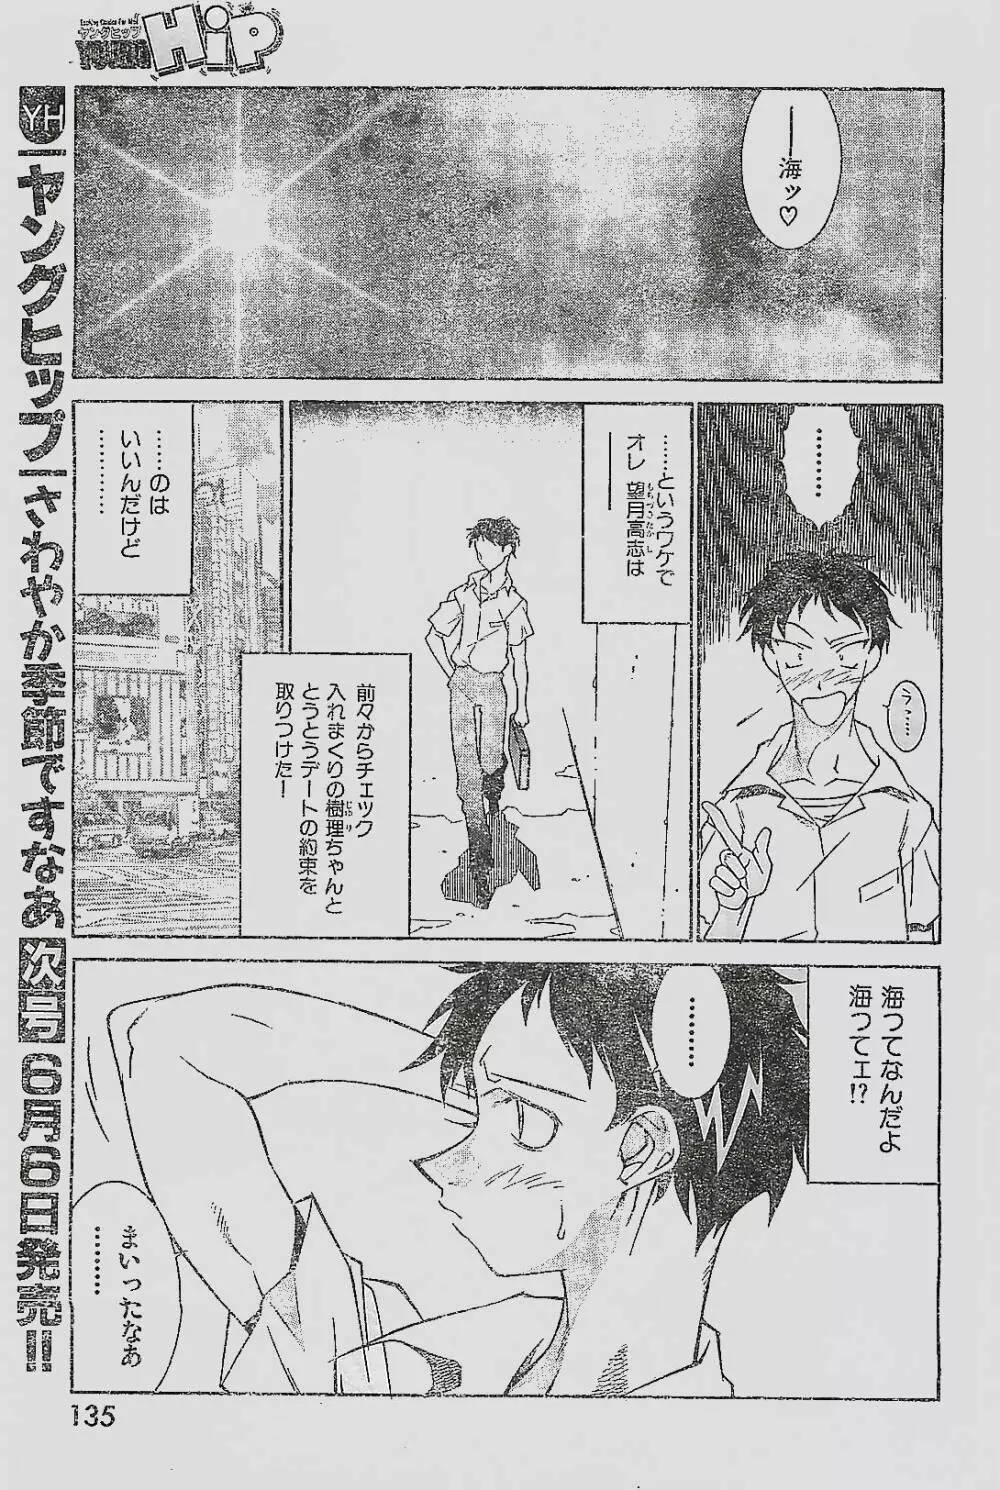 COMIC YOUNG HIP 1998年06月号 Page.135